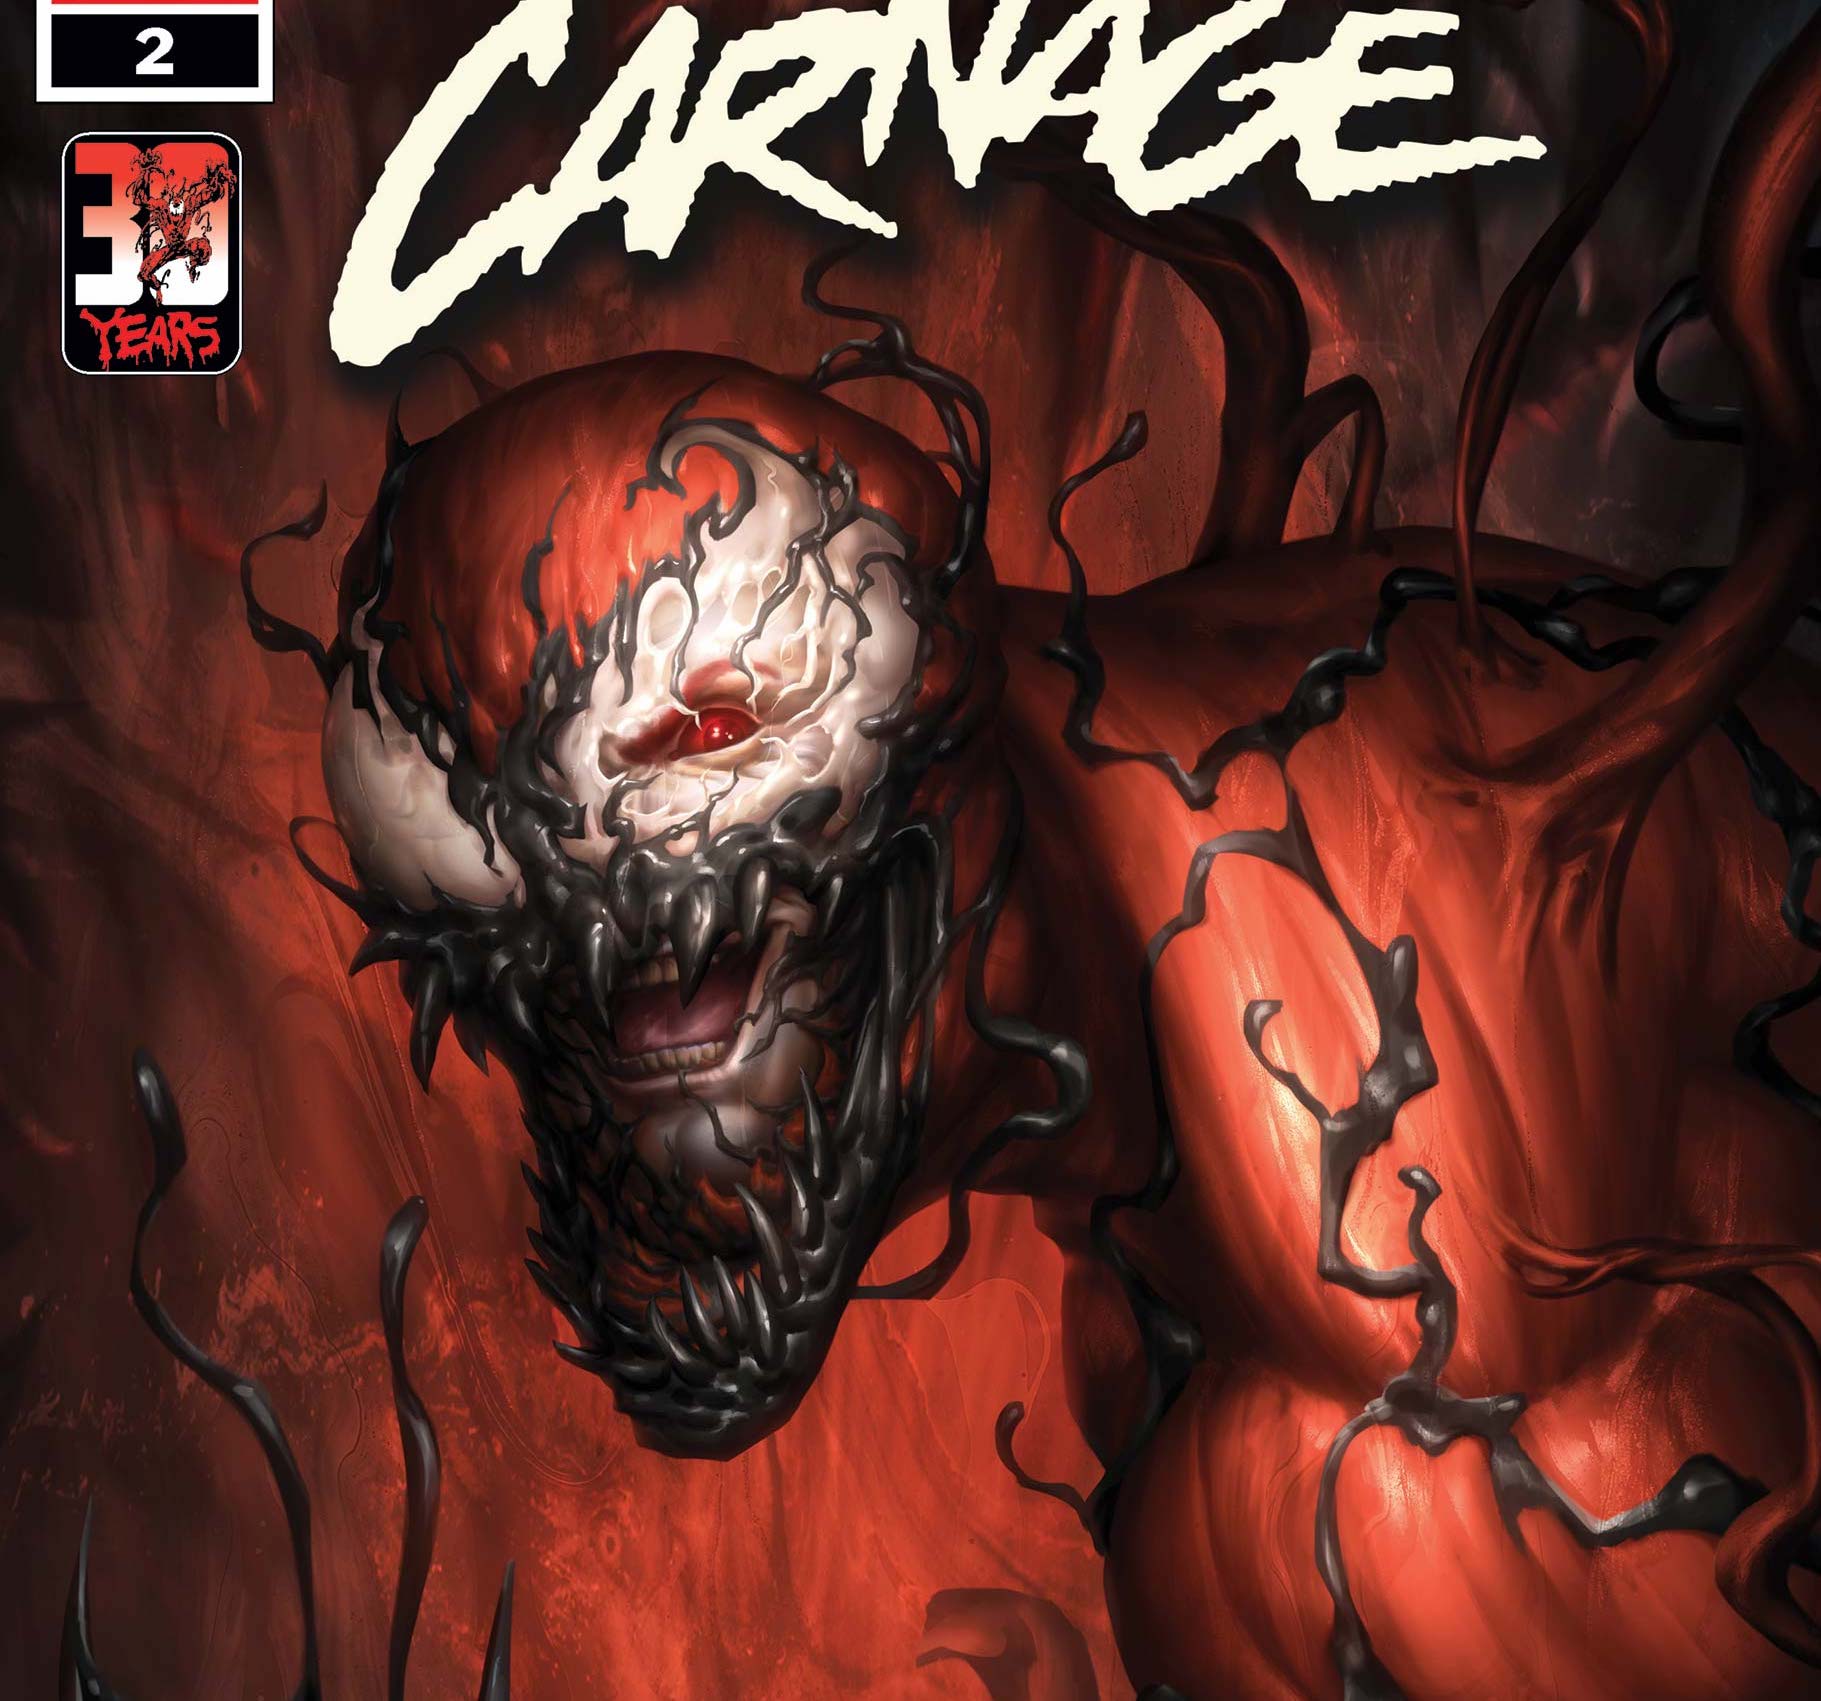 'Carnage' #2 introduces a little duality